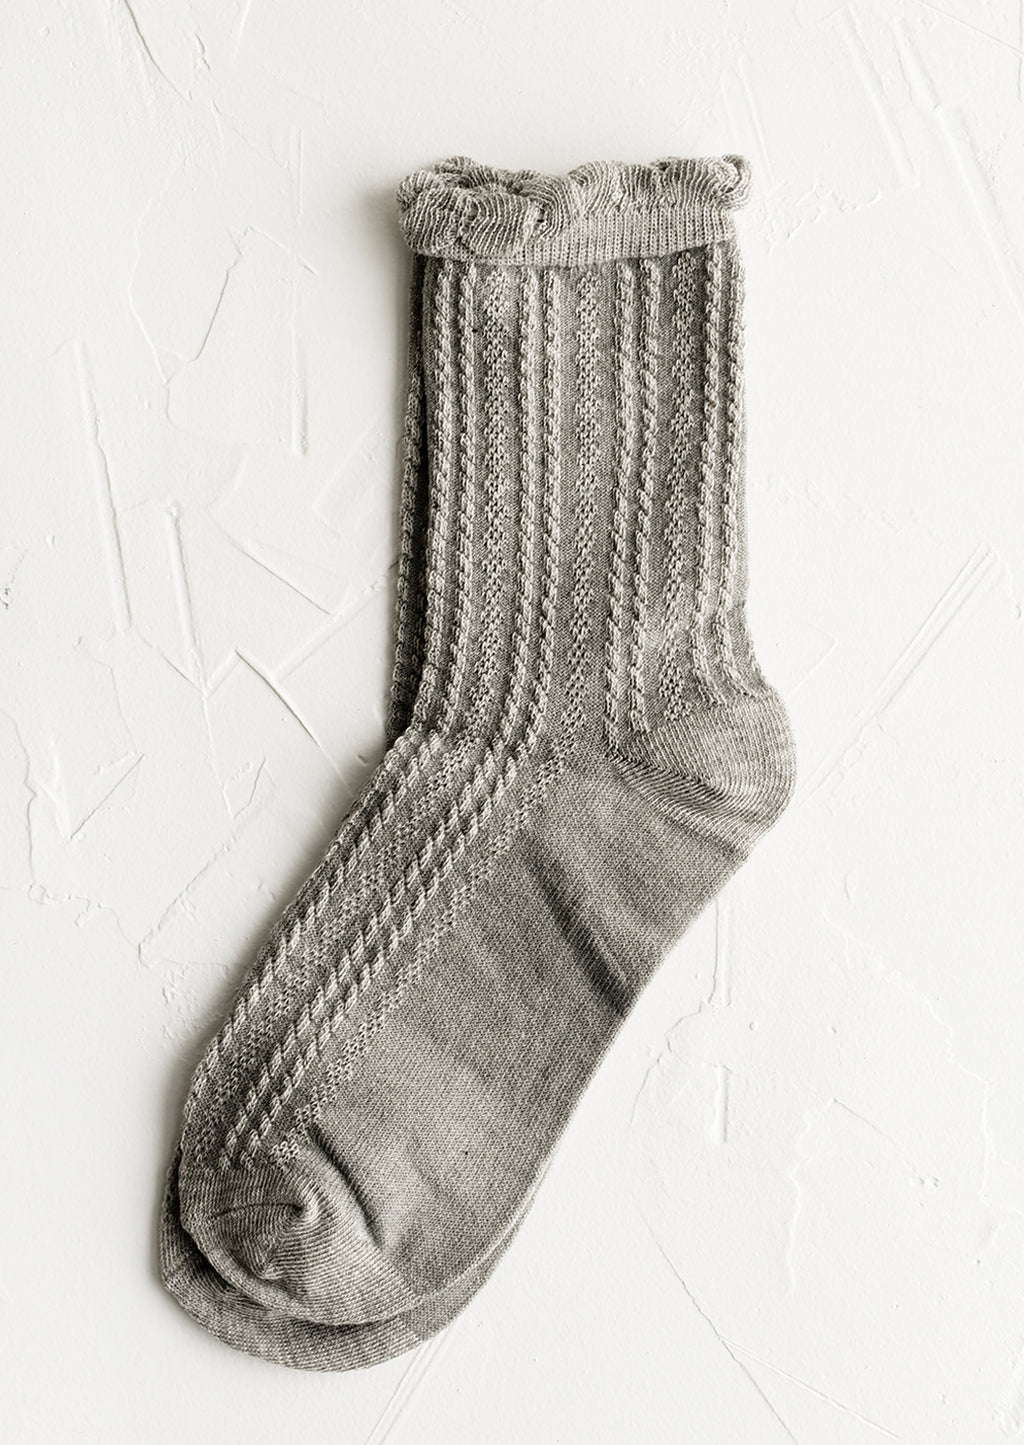 Heather Grey: A pair of cable knit socks with ruffled ankle in heather grey.